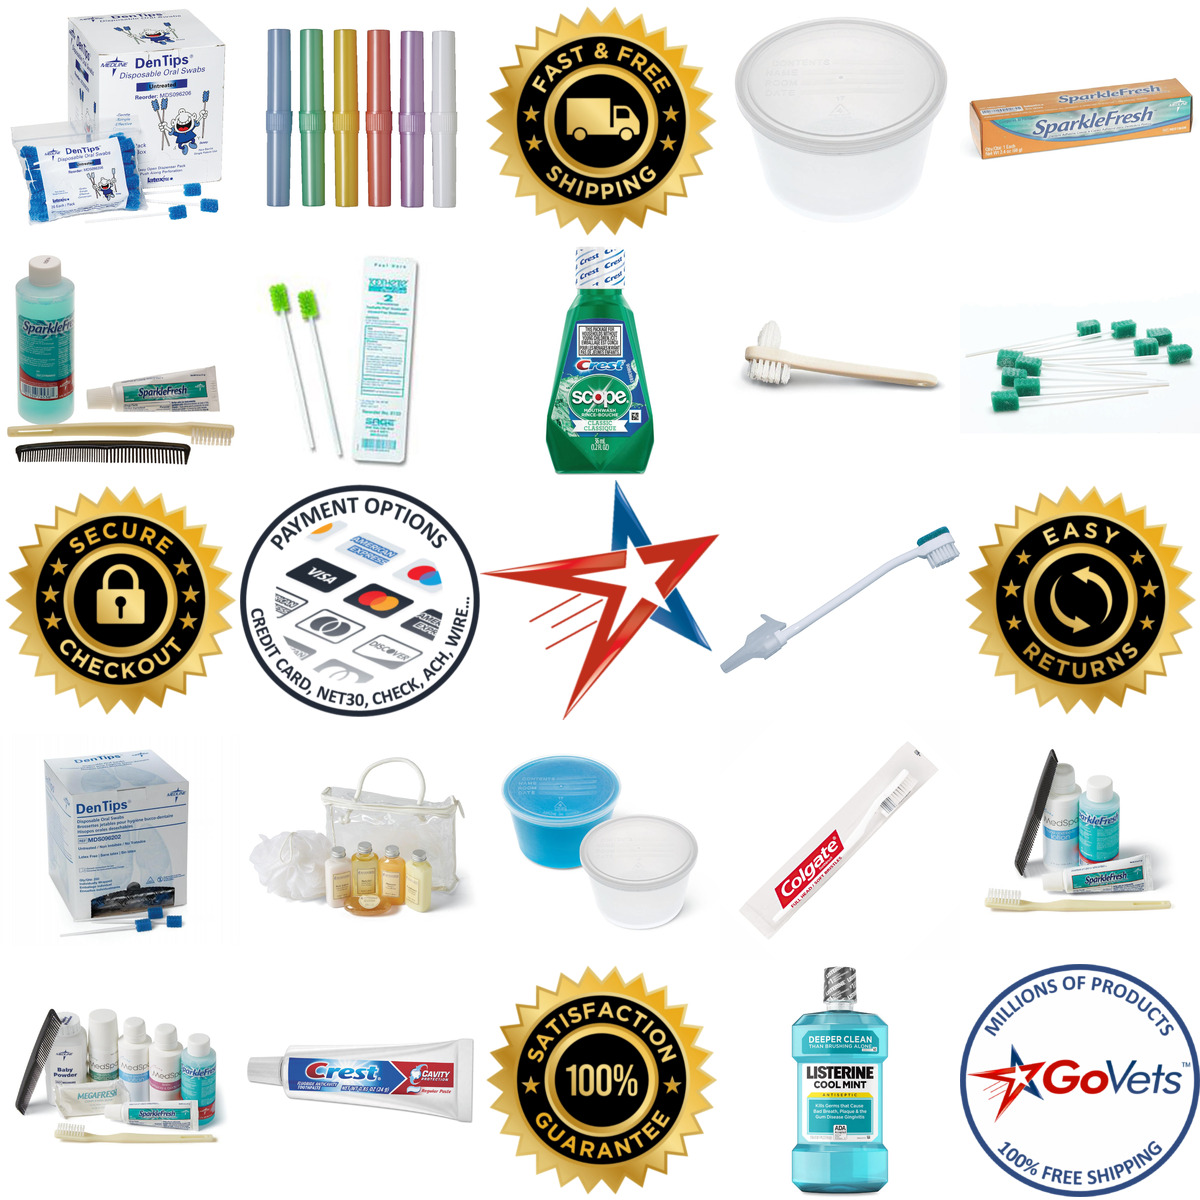 A selection of Dental Care products on GoVets